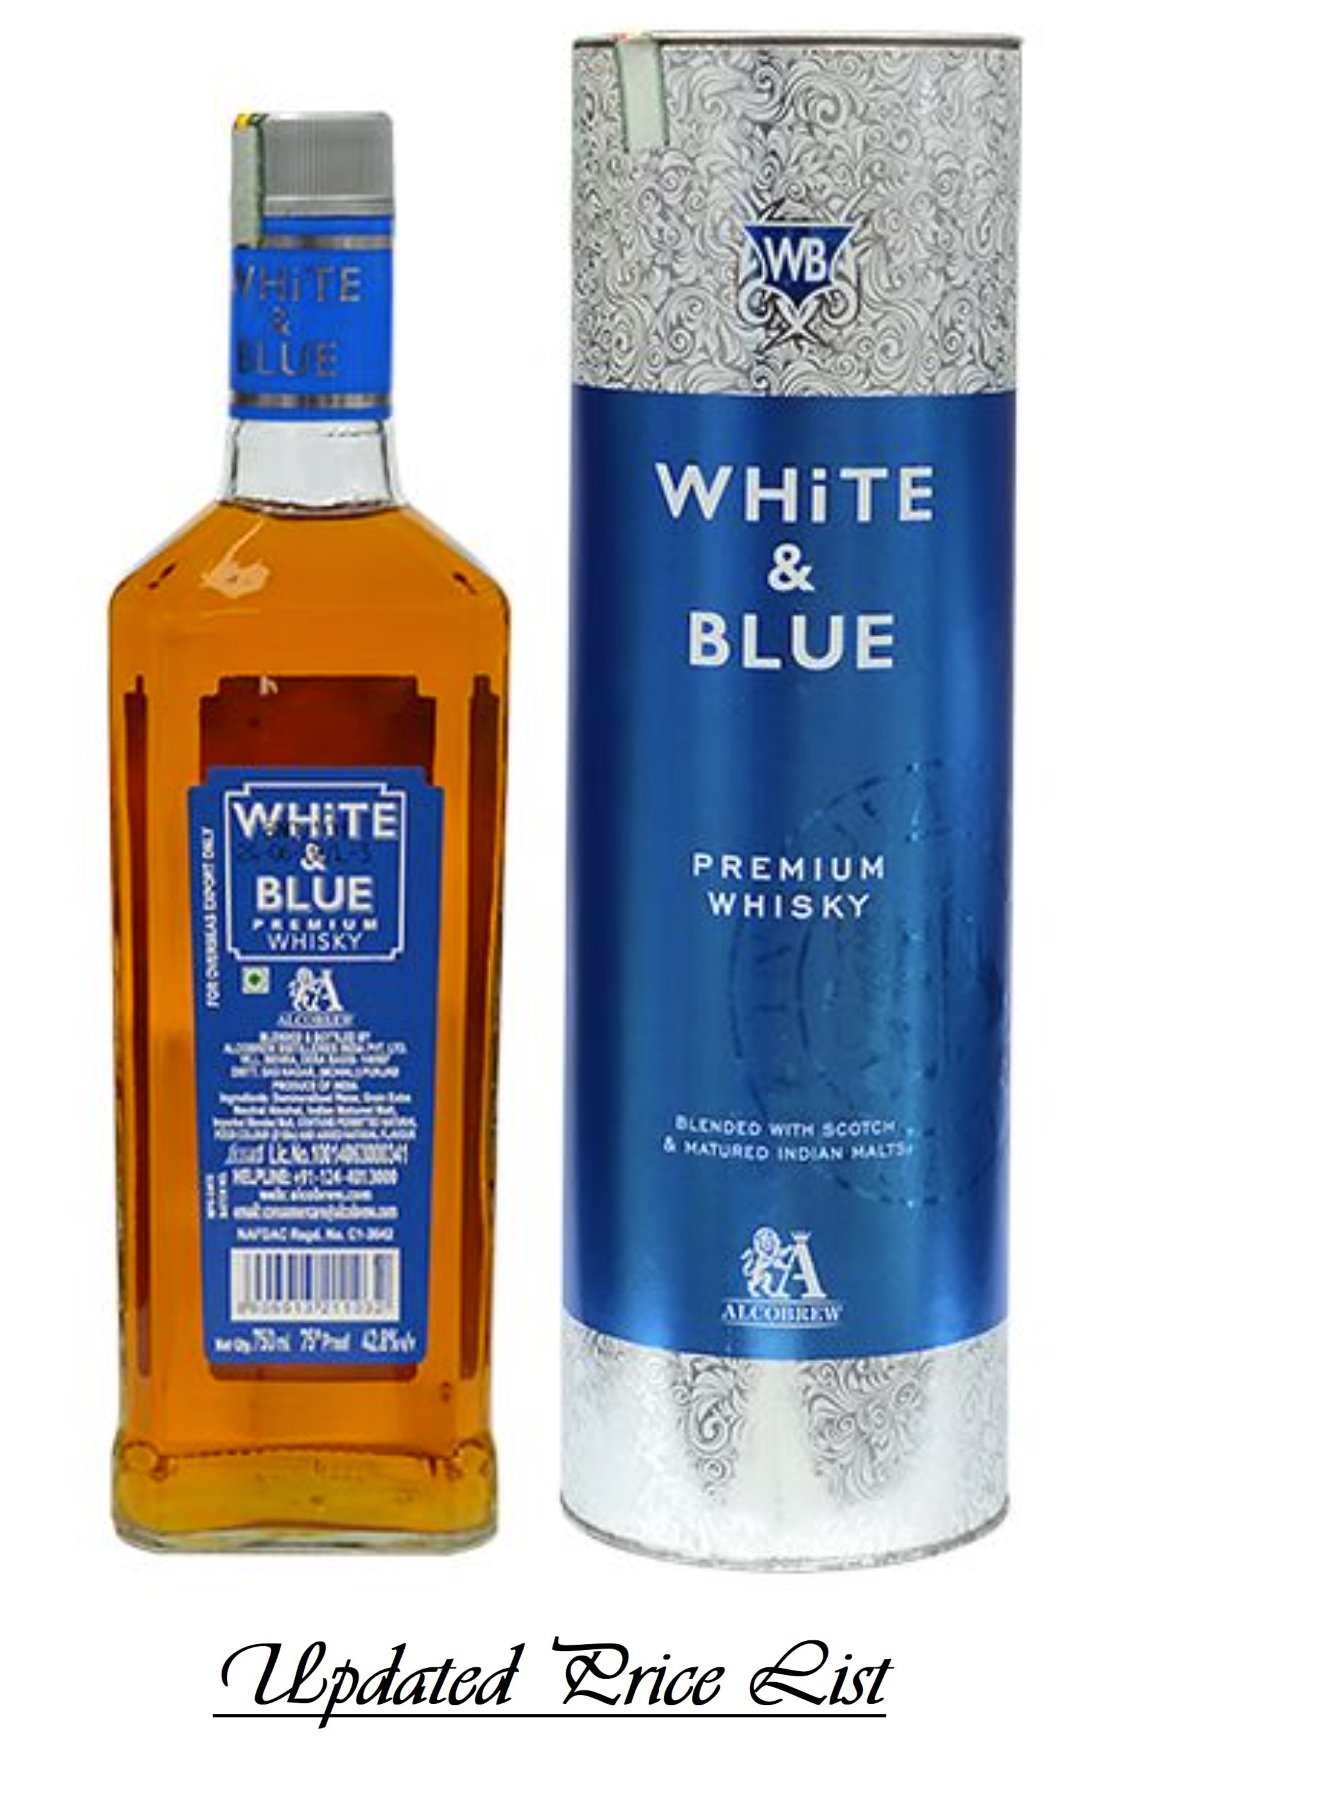 White and blue whisky price